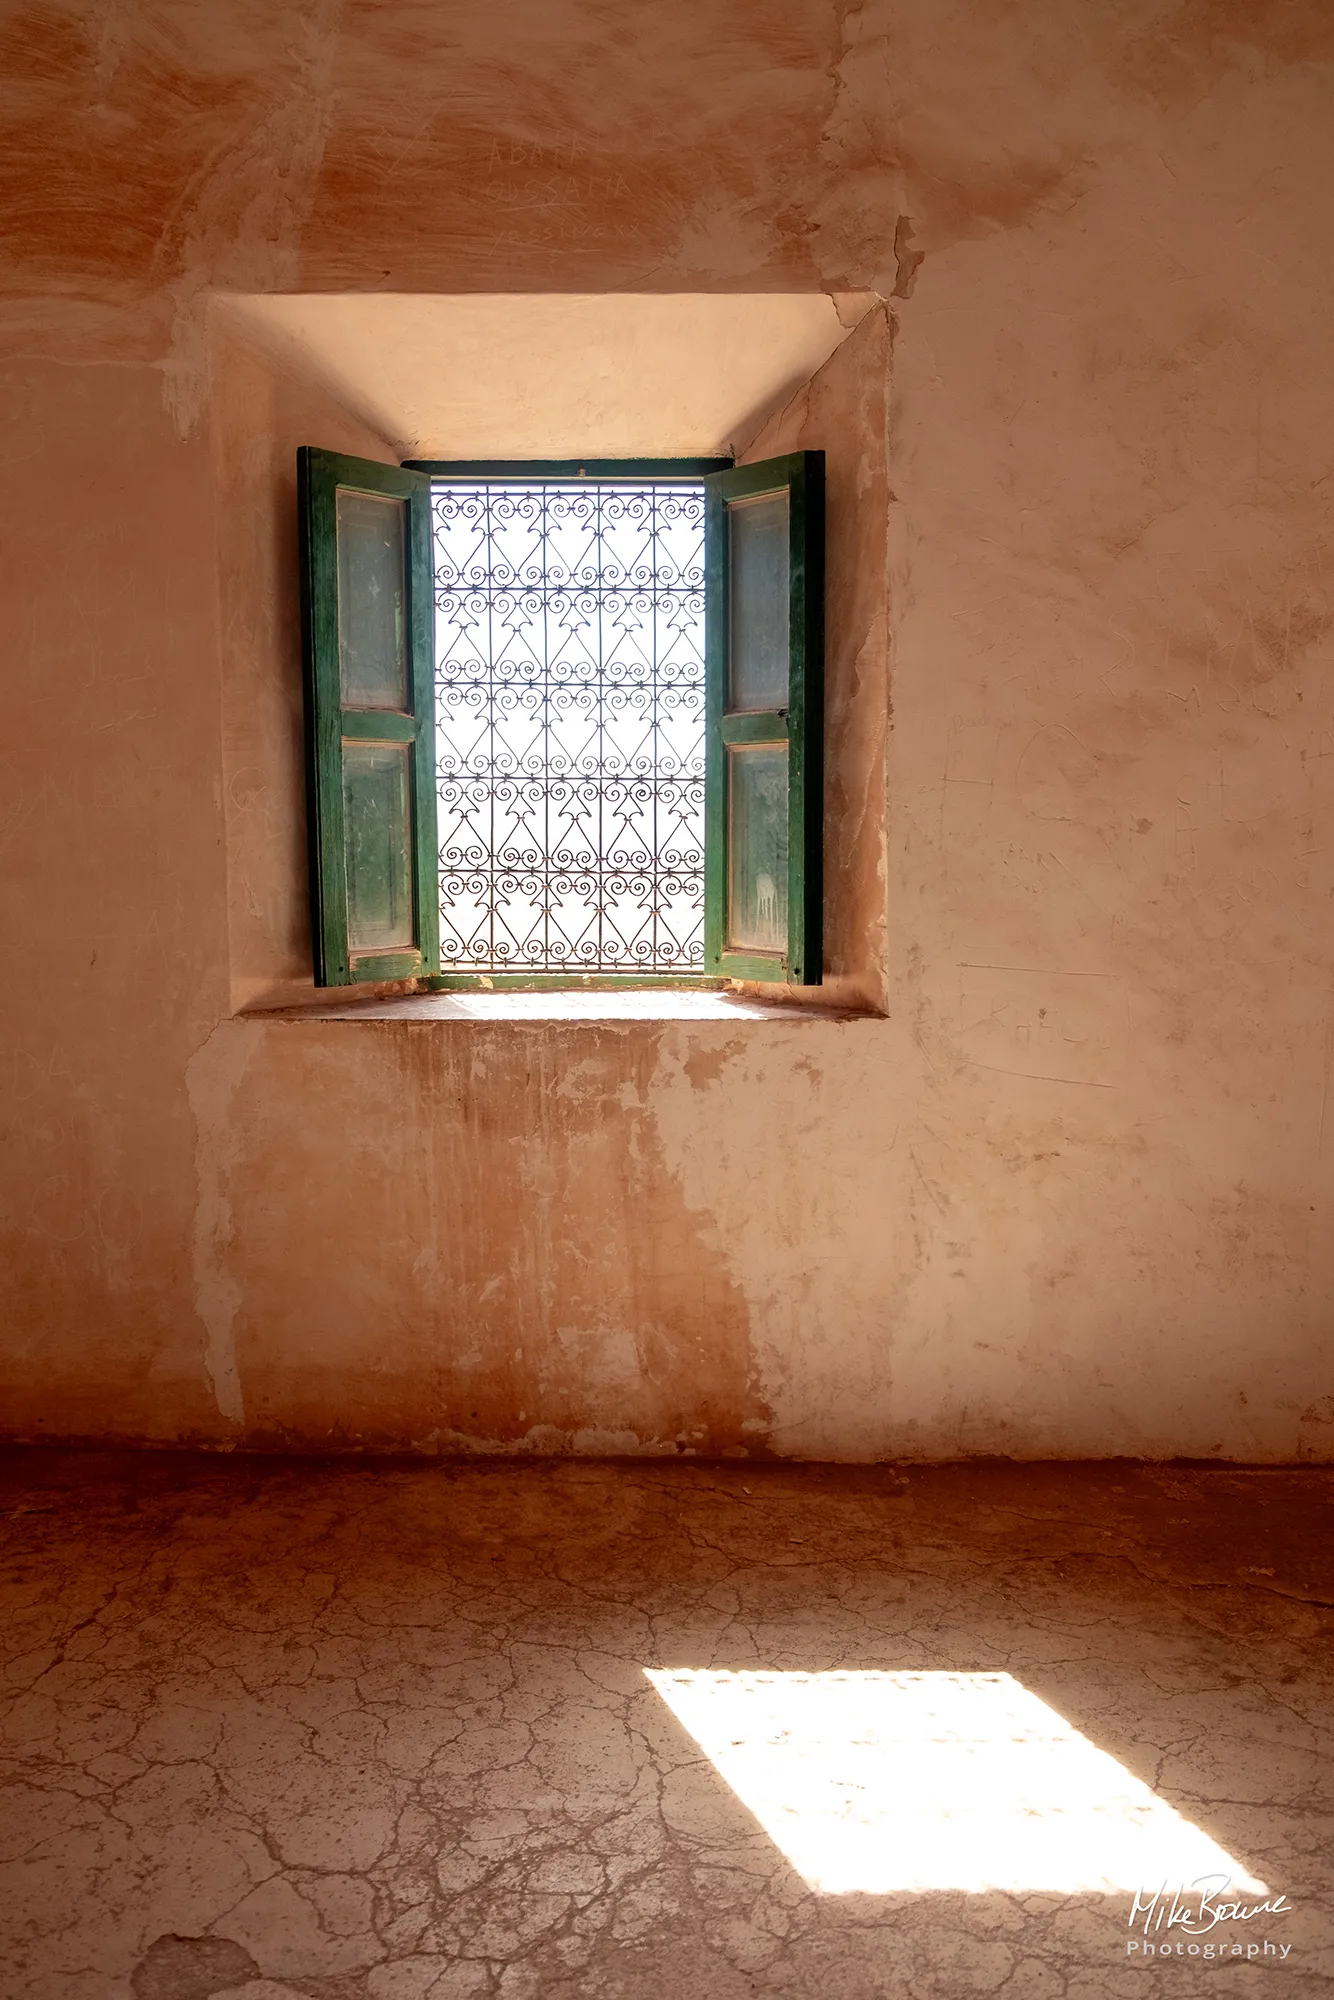 A bright sunny window with green shutters and sun shining on the floor at a Moroccan Kasbah